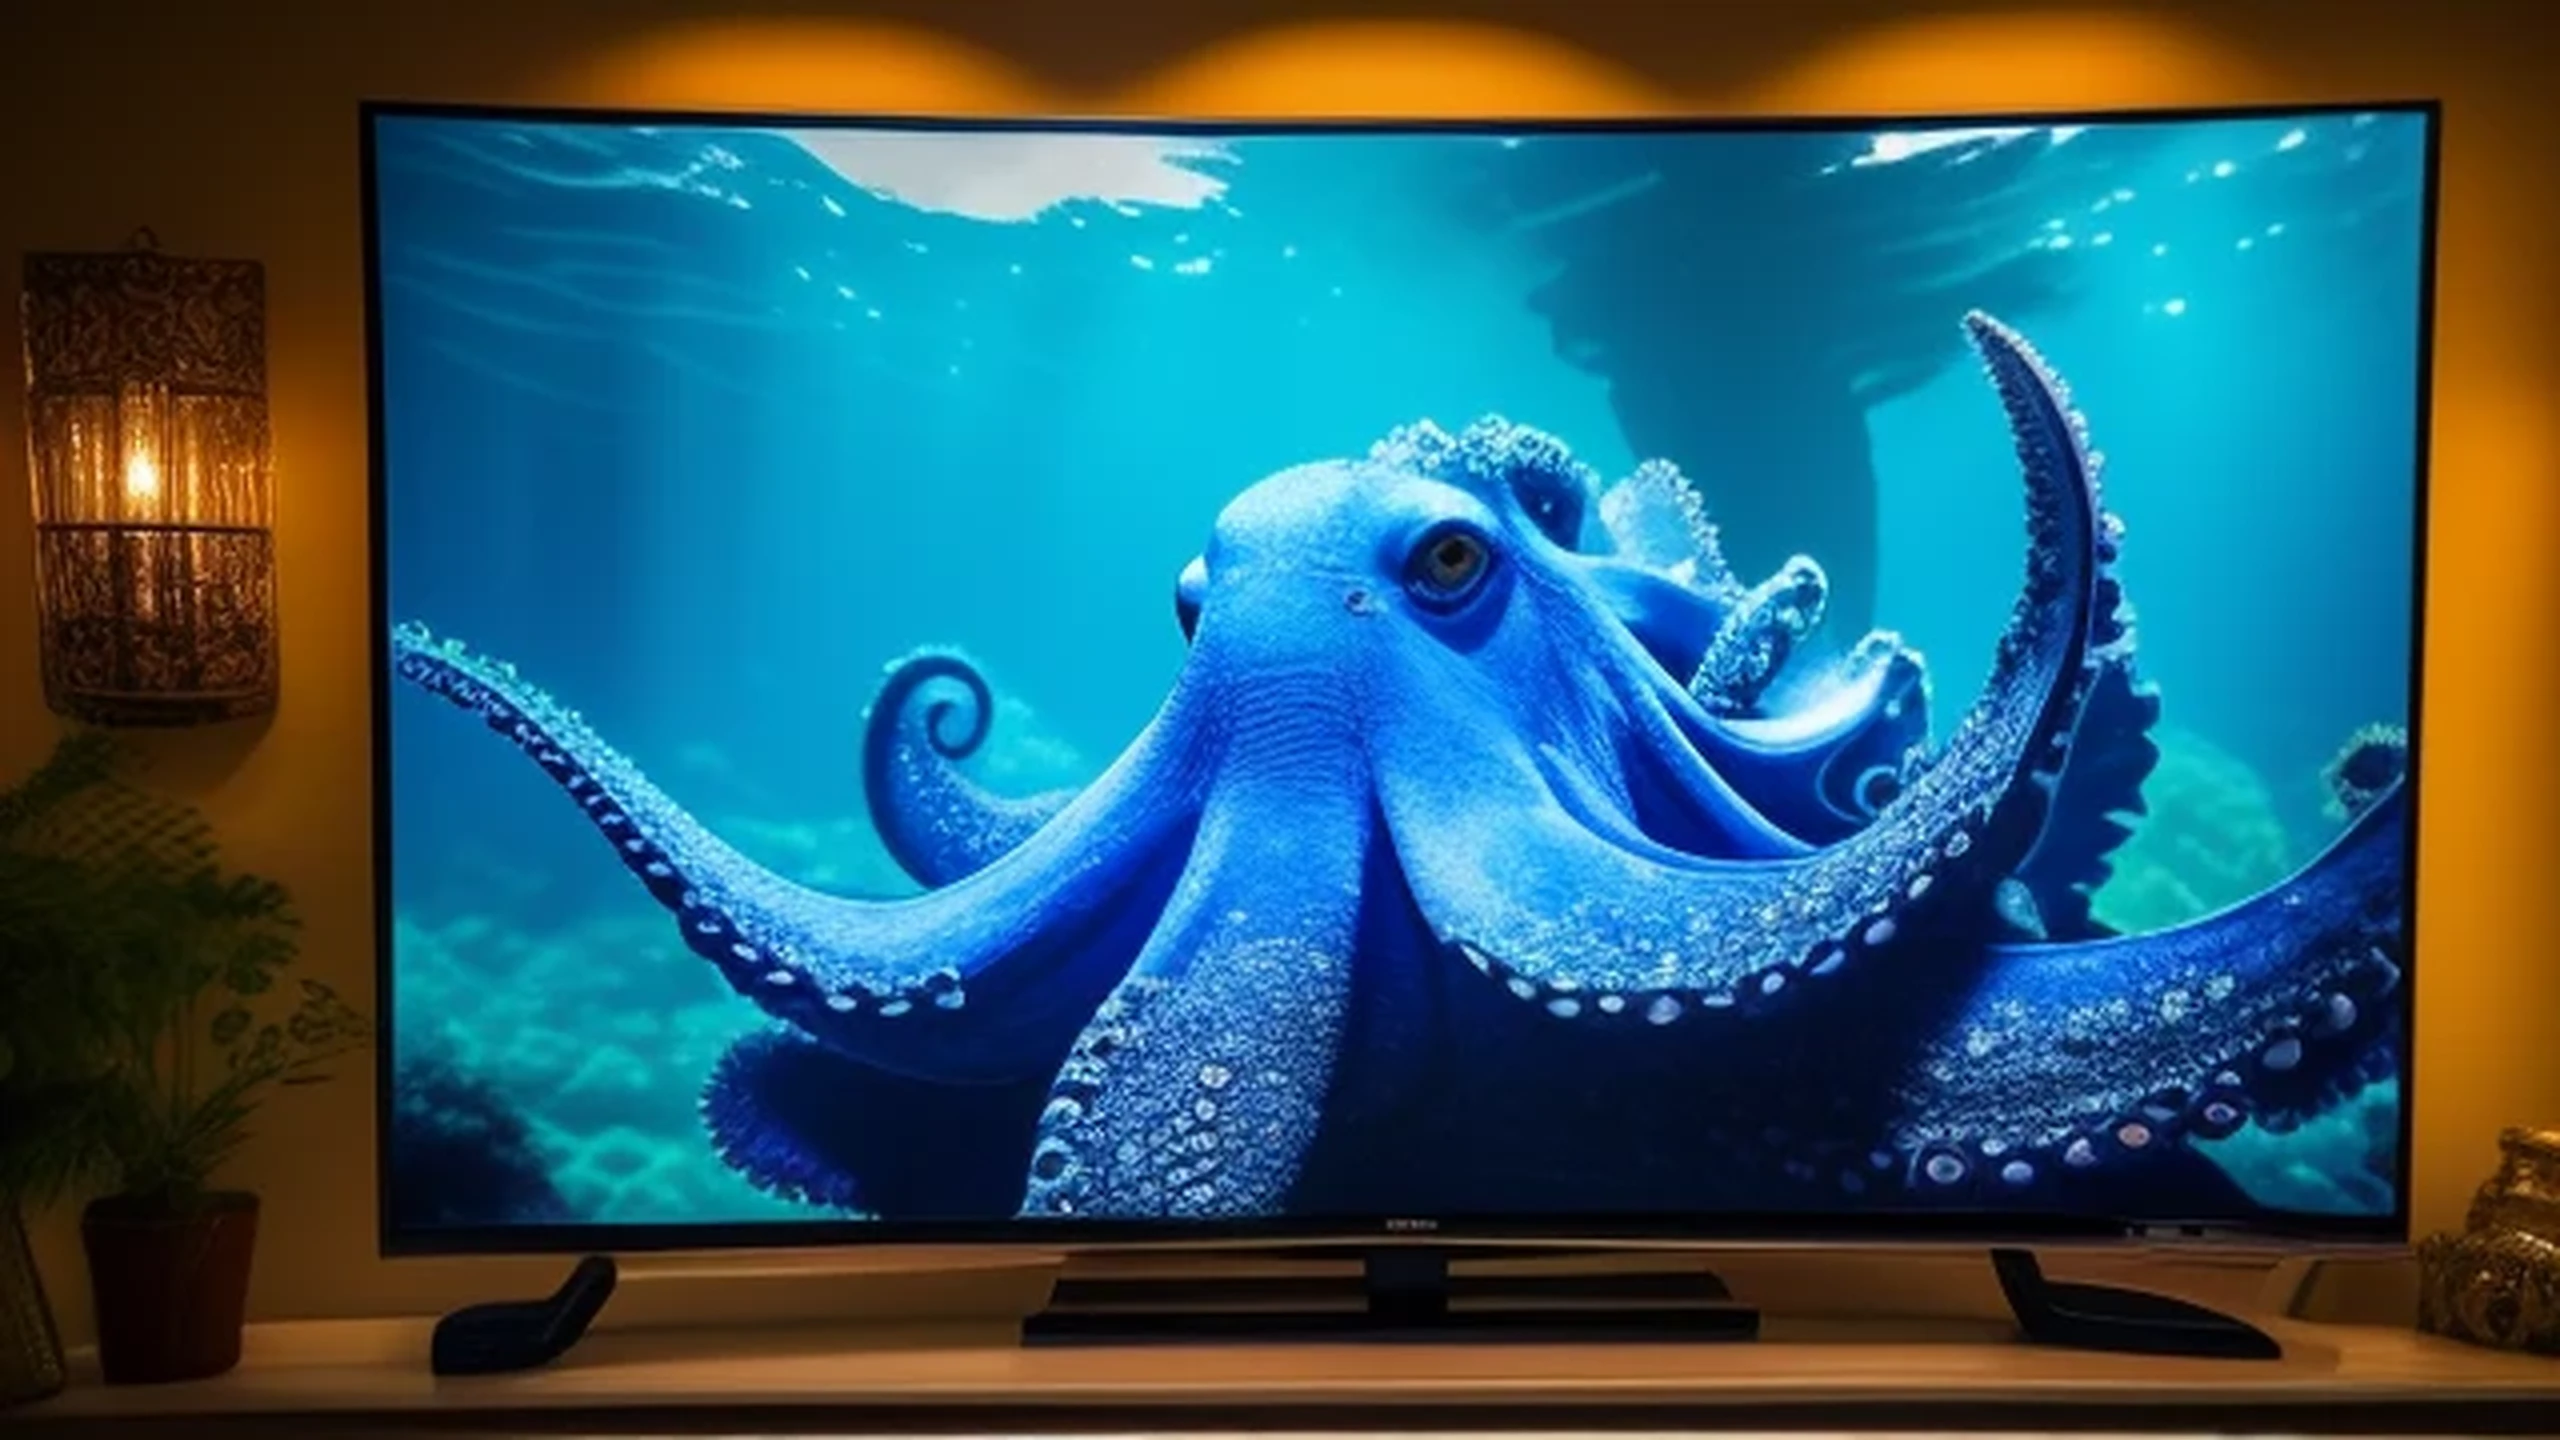 We see an old blue octopus watching TV. ...